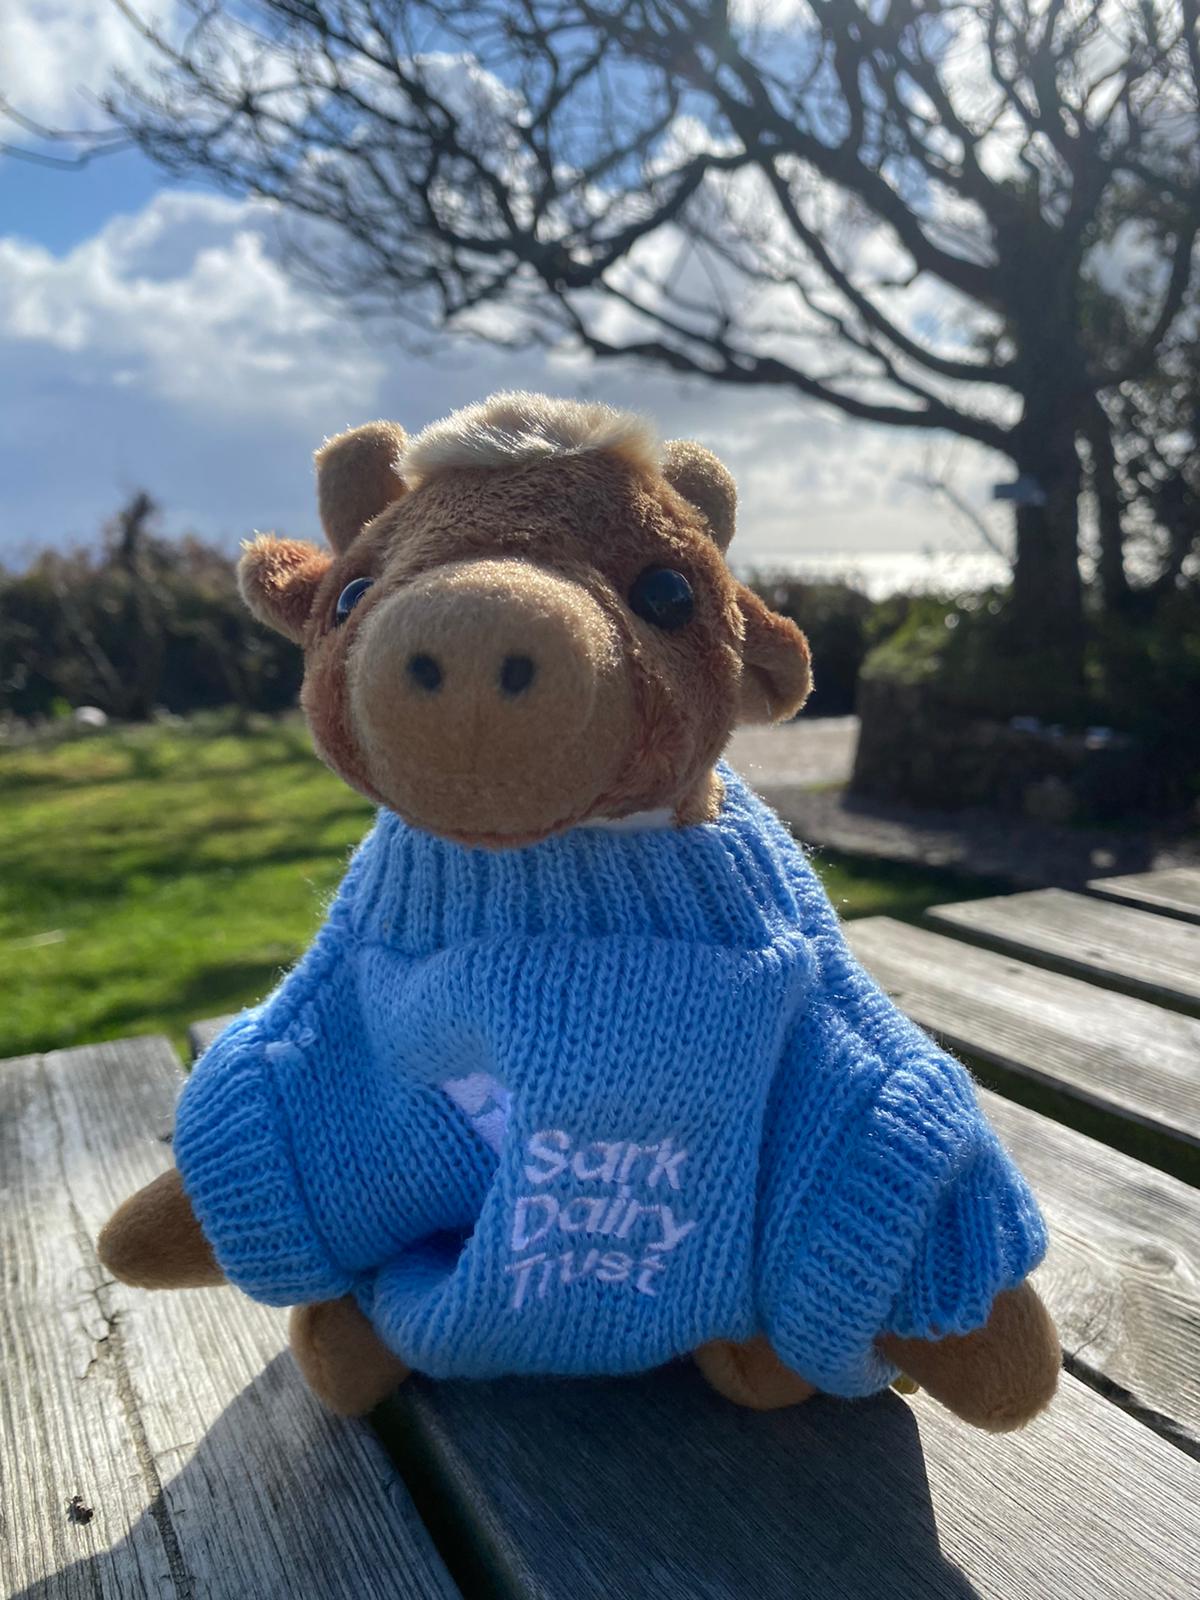 Sark Dairy Trust Cow with Jumper